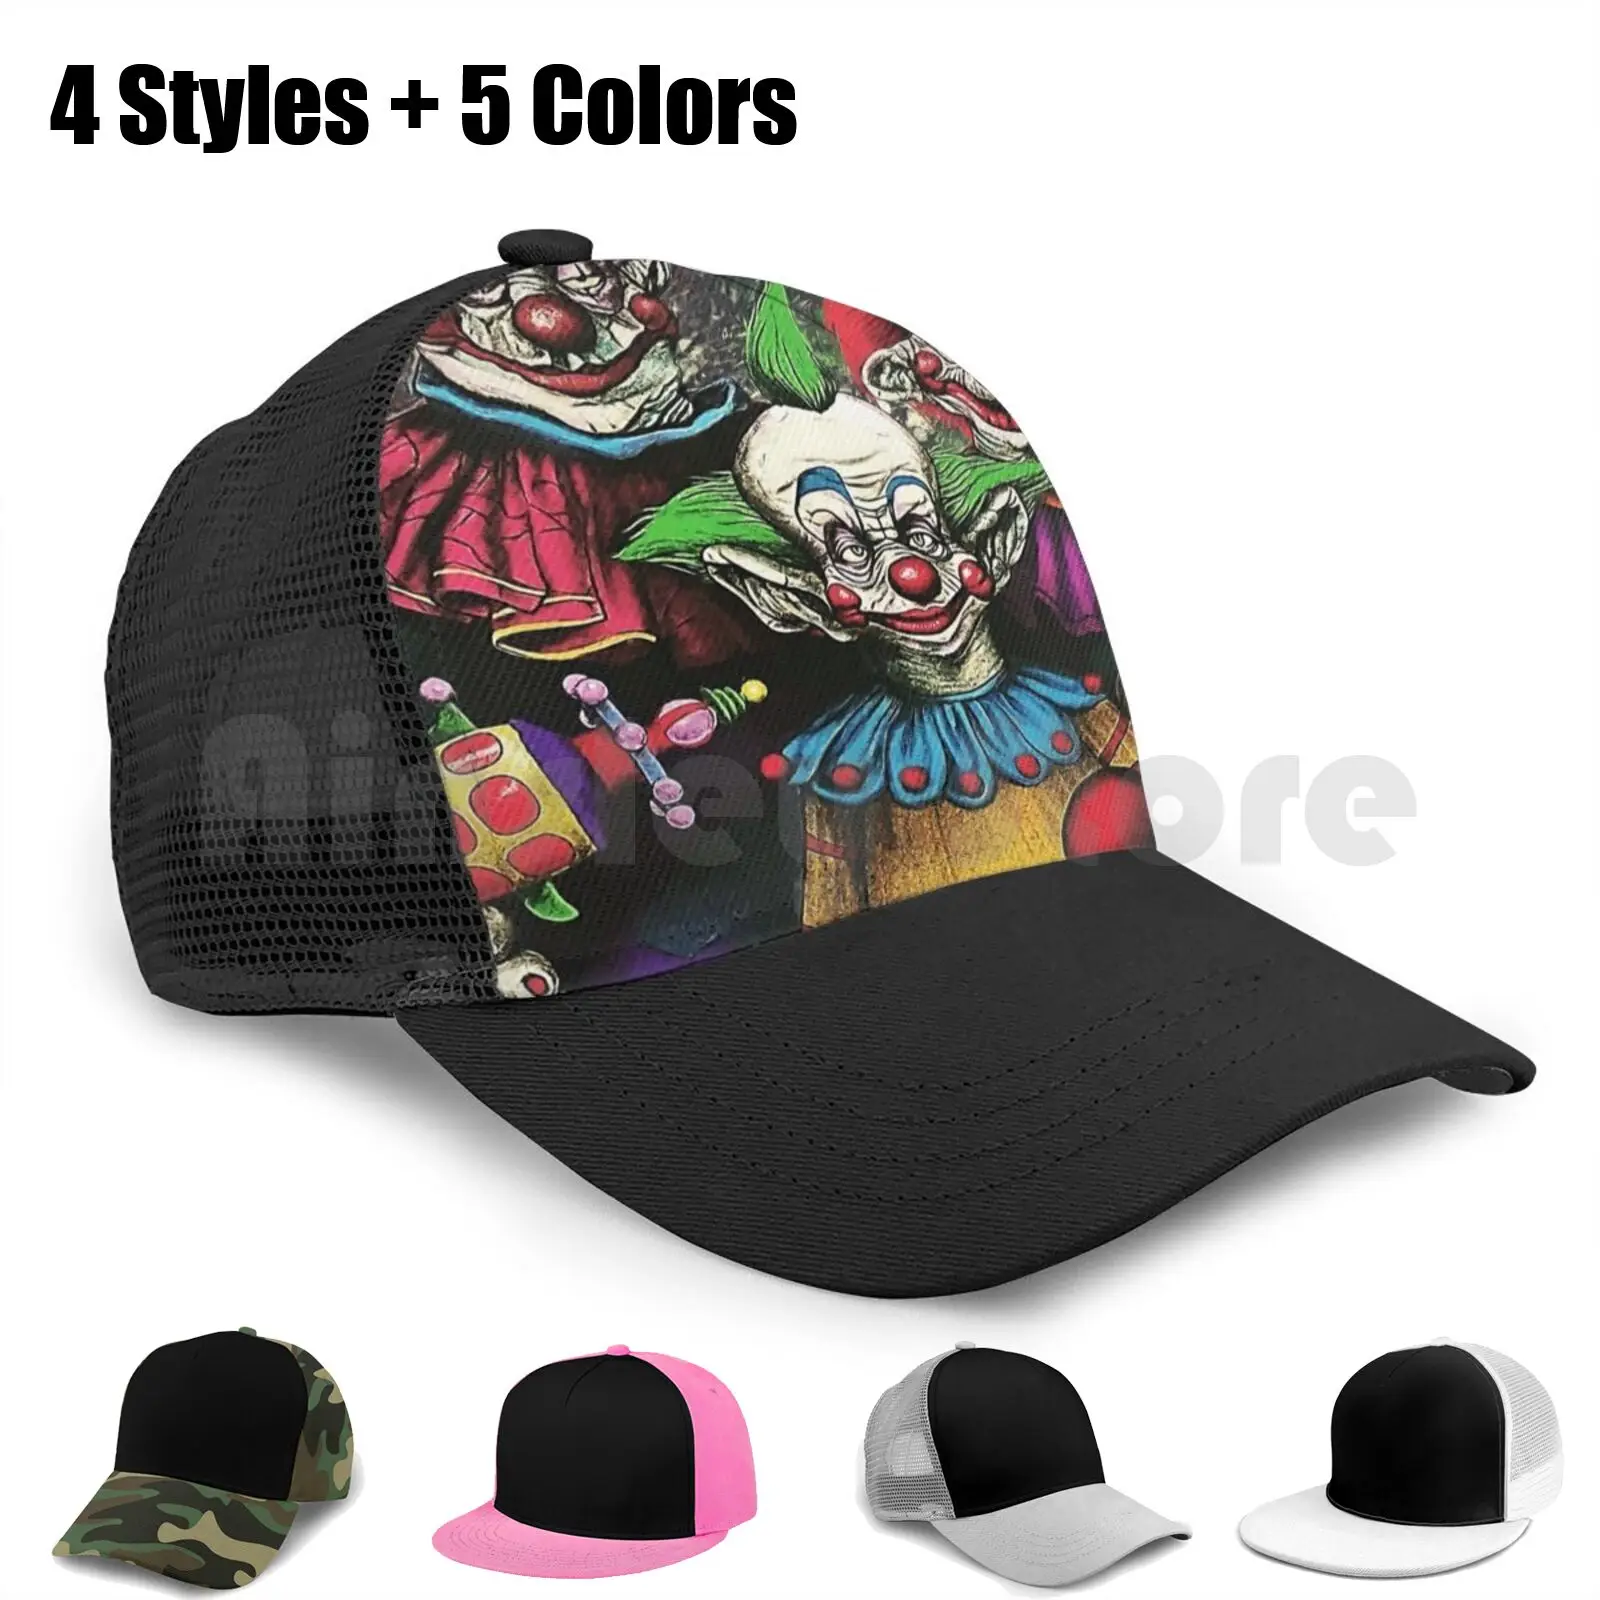 Killer Klowns From Outer Space Baseball Cap Adjustable Snapback Hats Hip Hop Killer Klowns From Outer Space Horror Comedy Dark